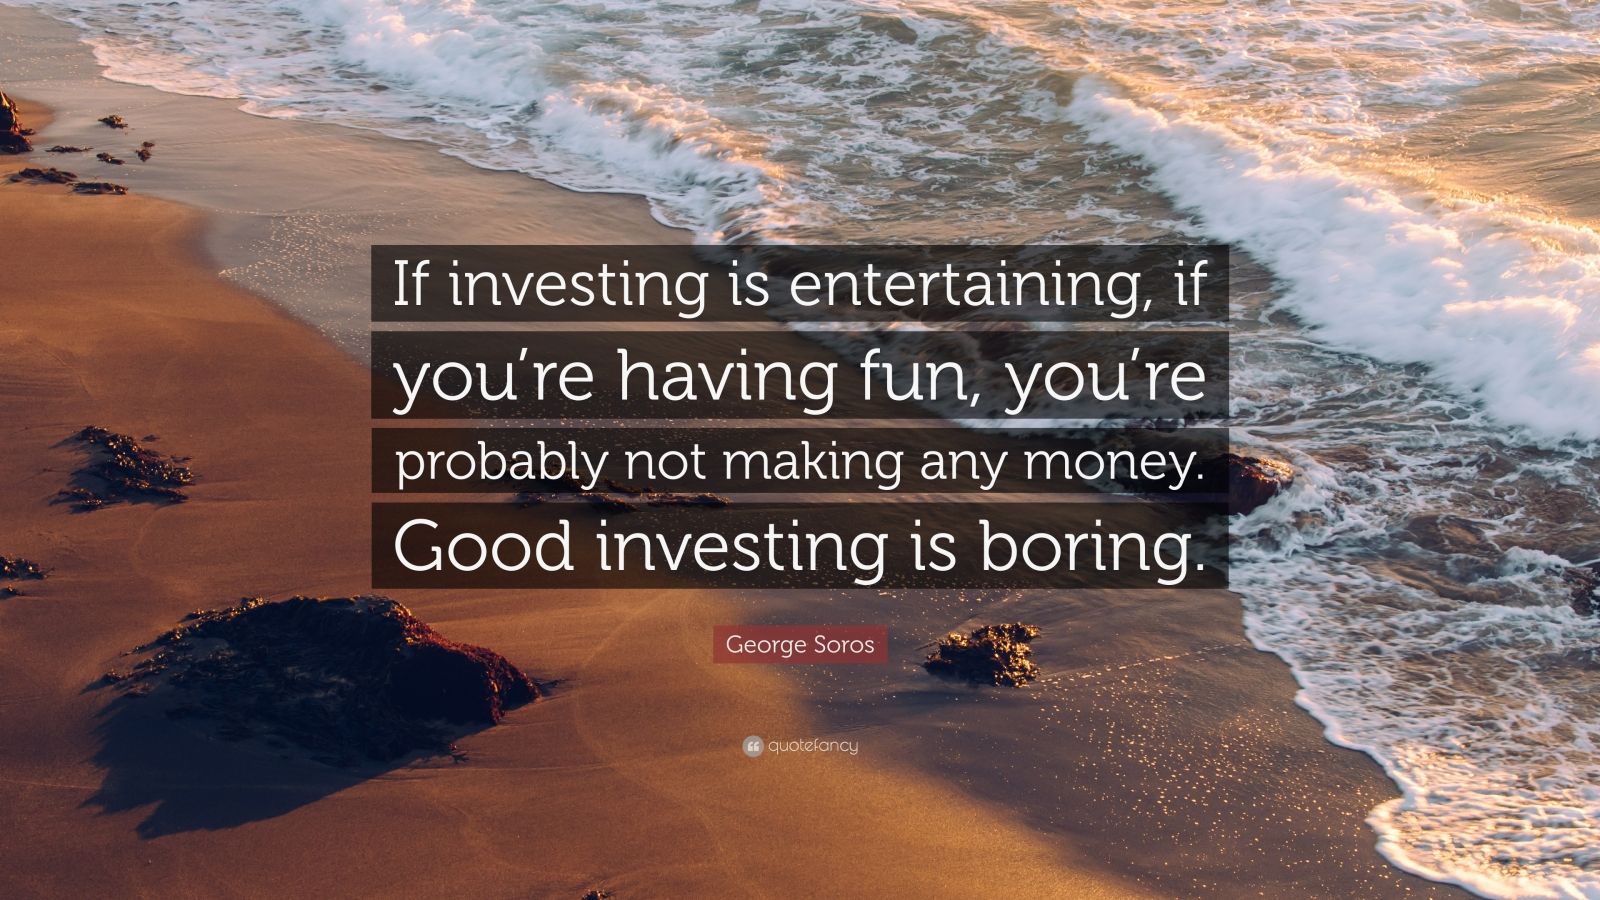 Soros Quote “If investing is entertaining, if you